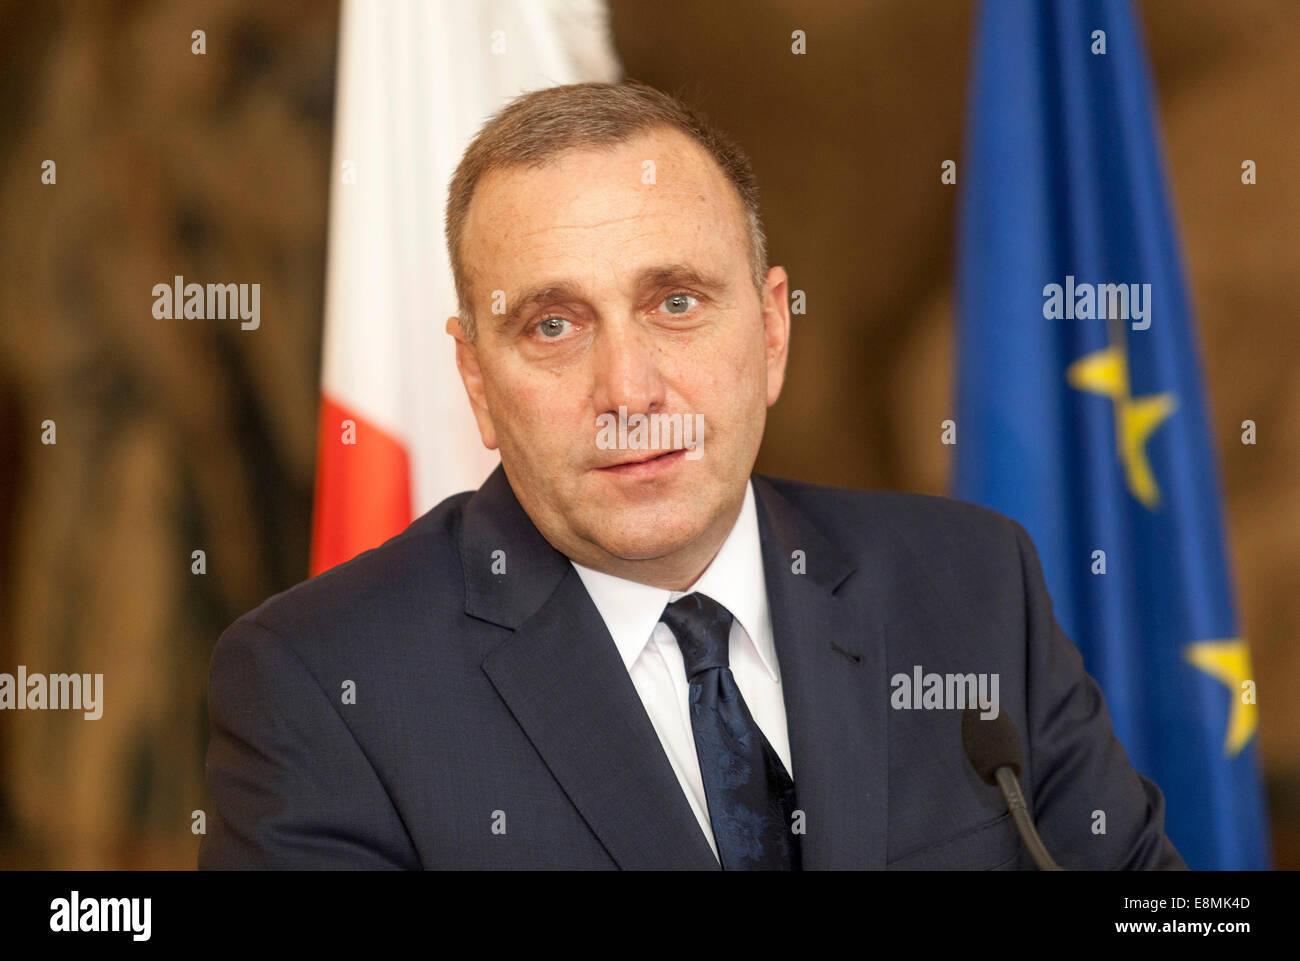 Prague, Czech Republic. 10th October, 2014 Grzegorz Schetyna, Minister of Foreign Affairs of Poland during a press conference. Stock Photo